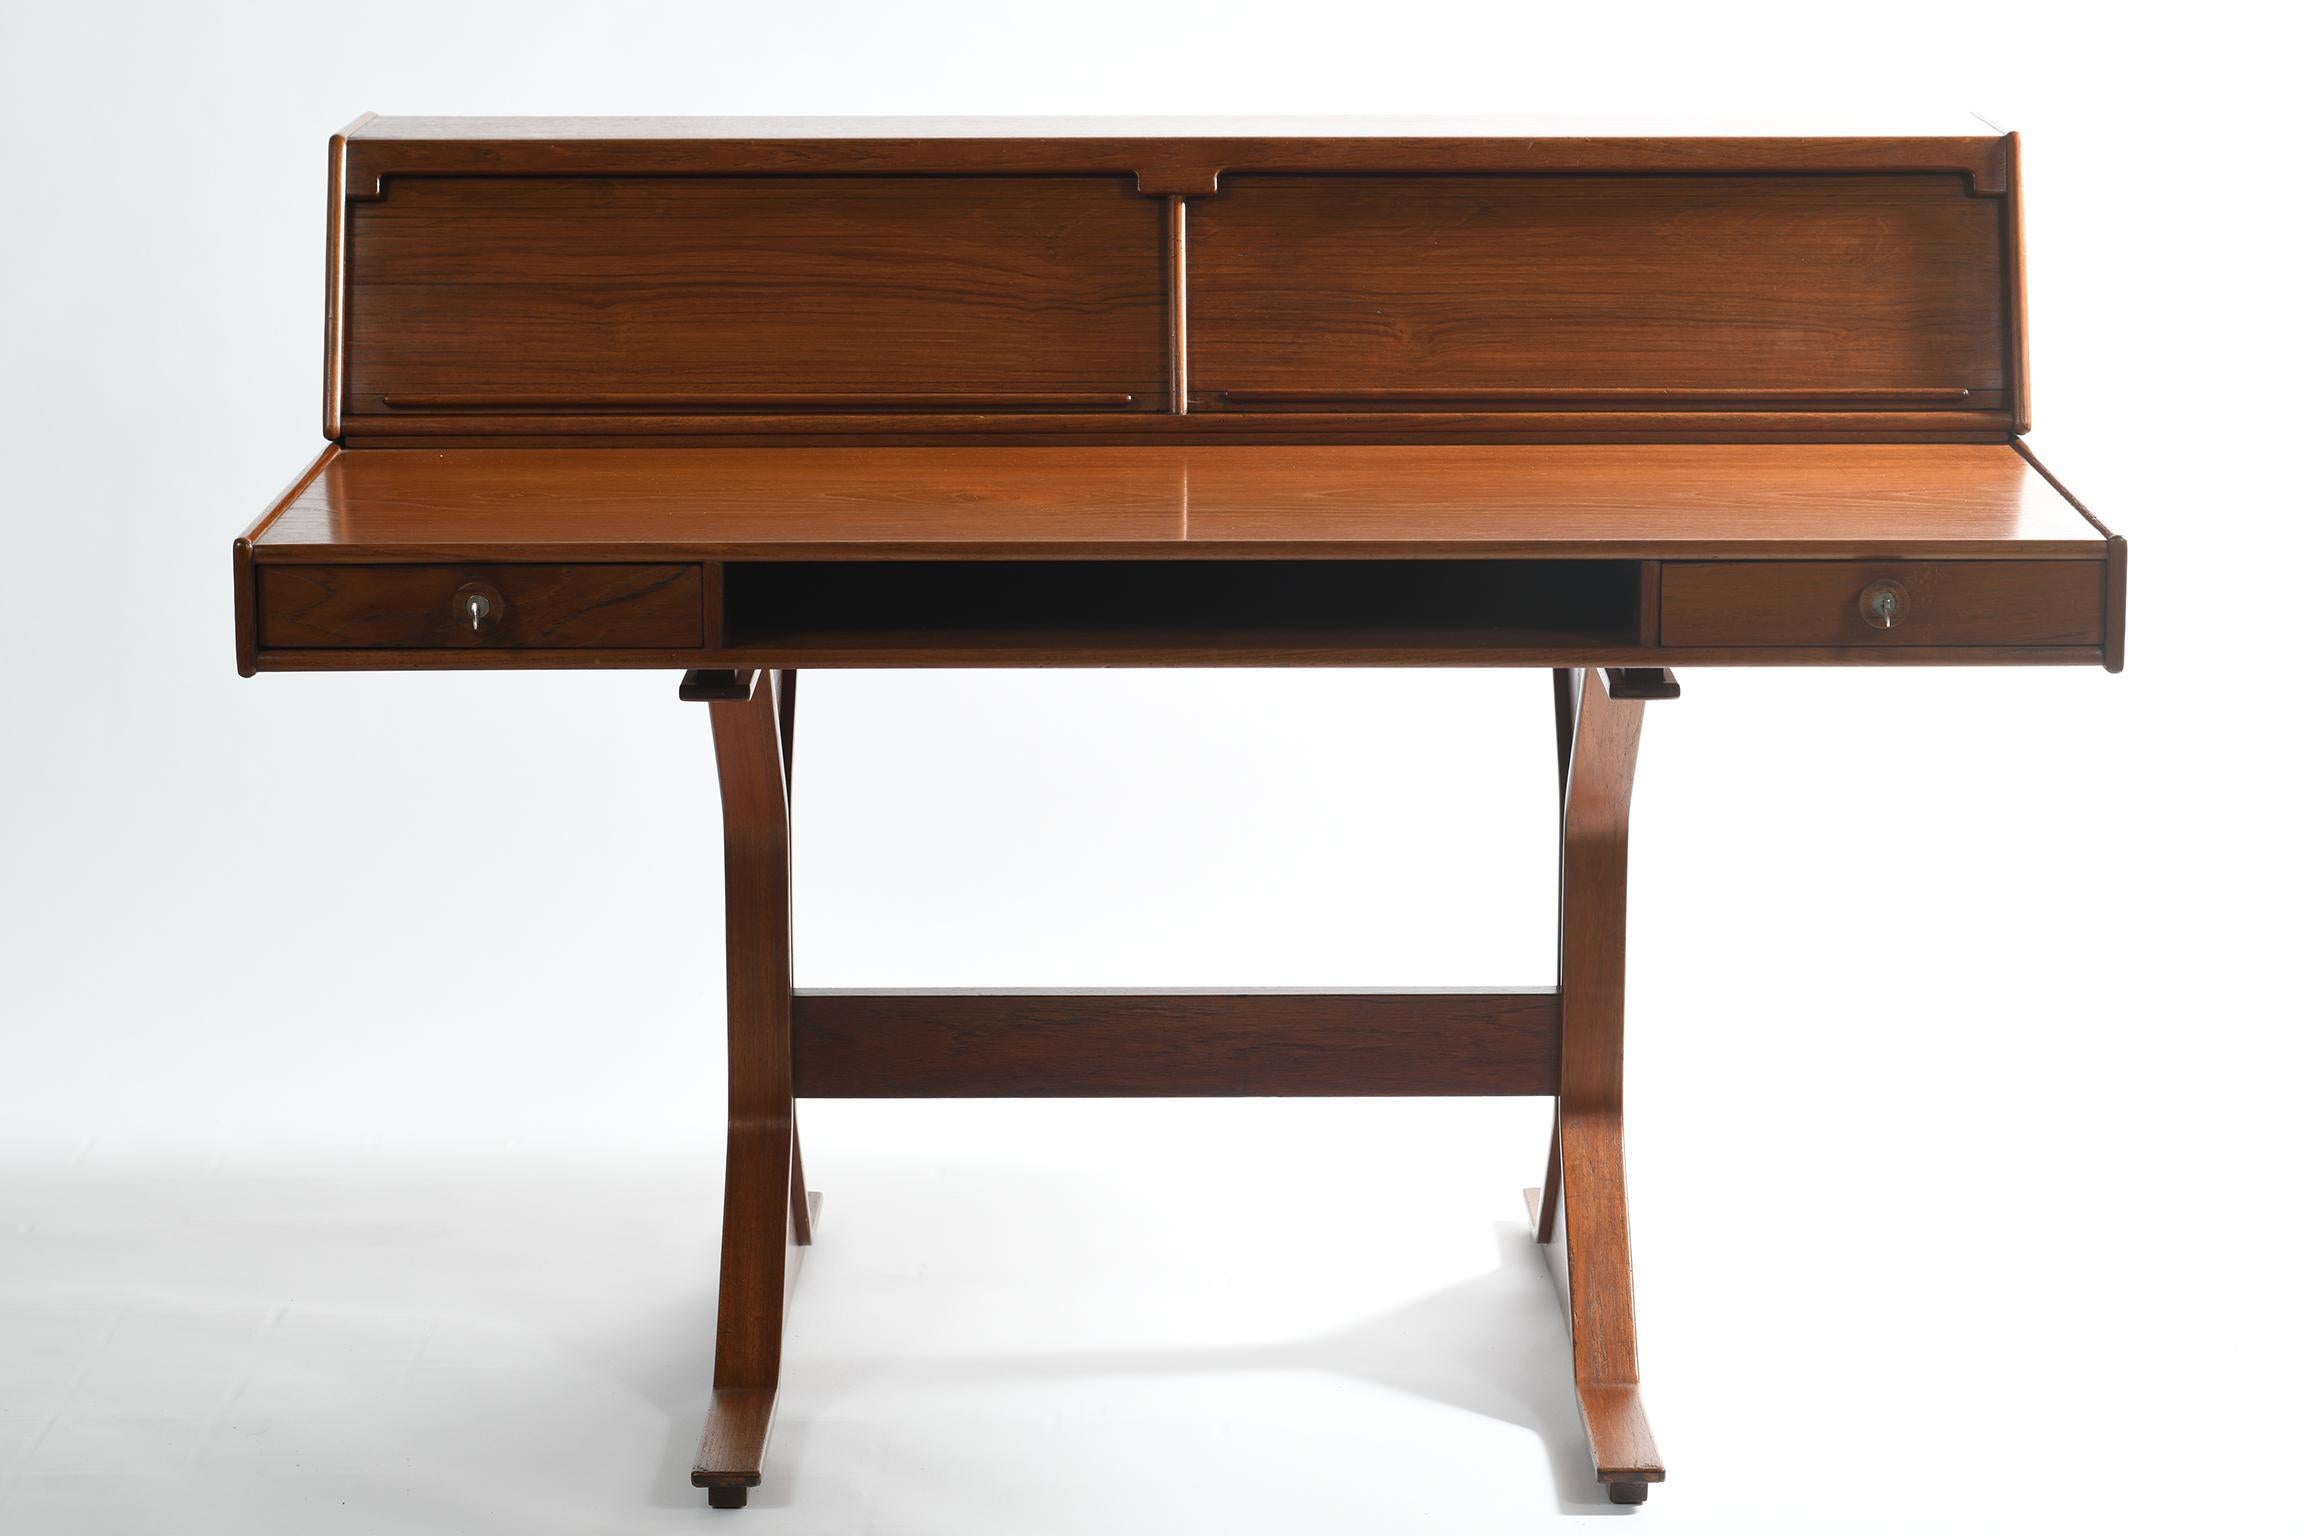 Iconic midcentury Italian writing desk designed by Gianfranco Frattini for Bernini in the 1957 model 530, the top writing section has two side drawers to the front, with key, and a central document shelf. On the top back sits a further section